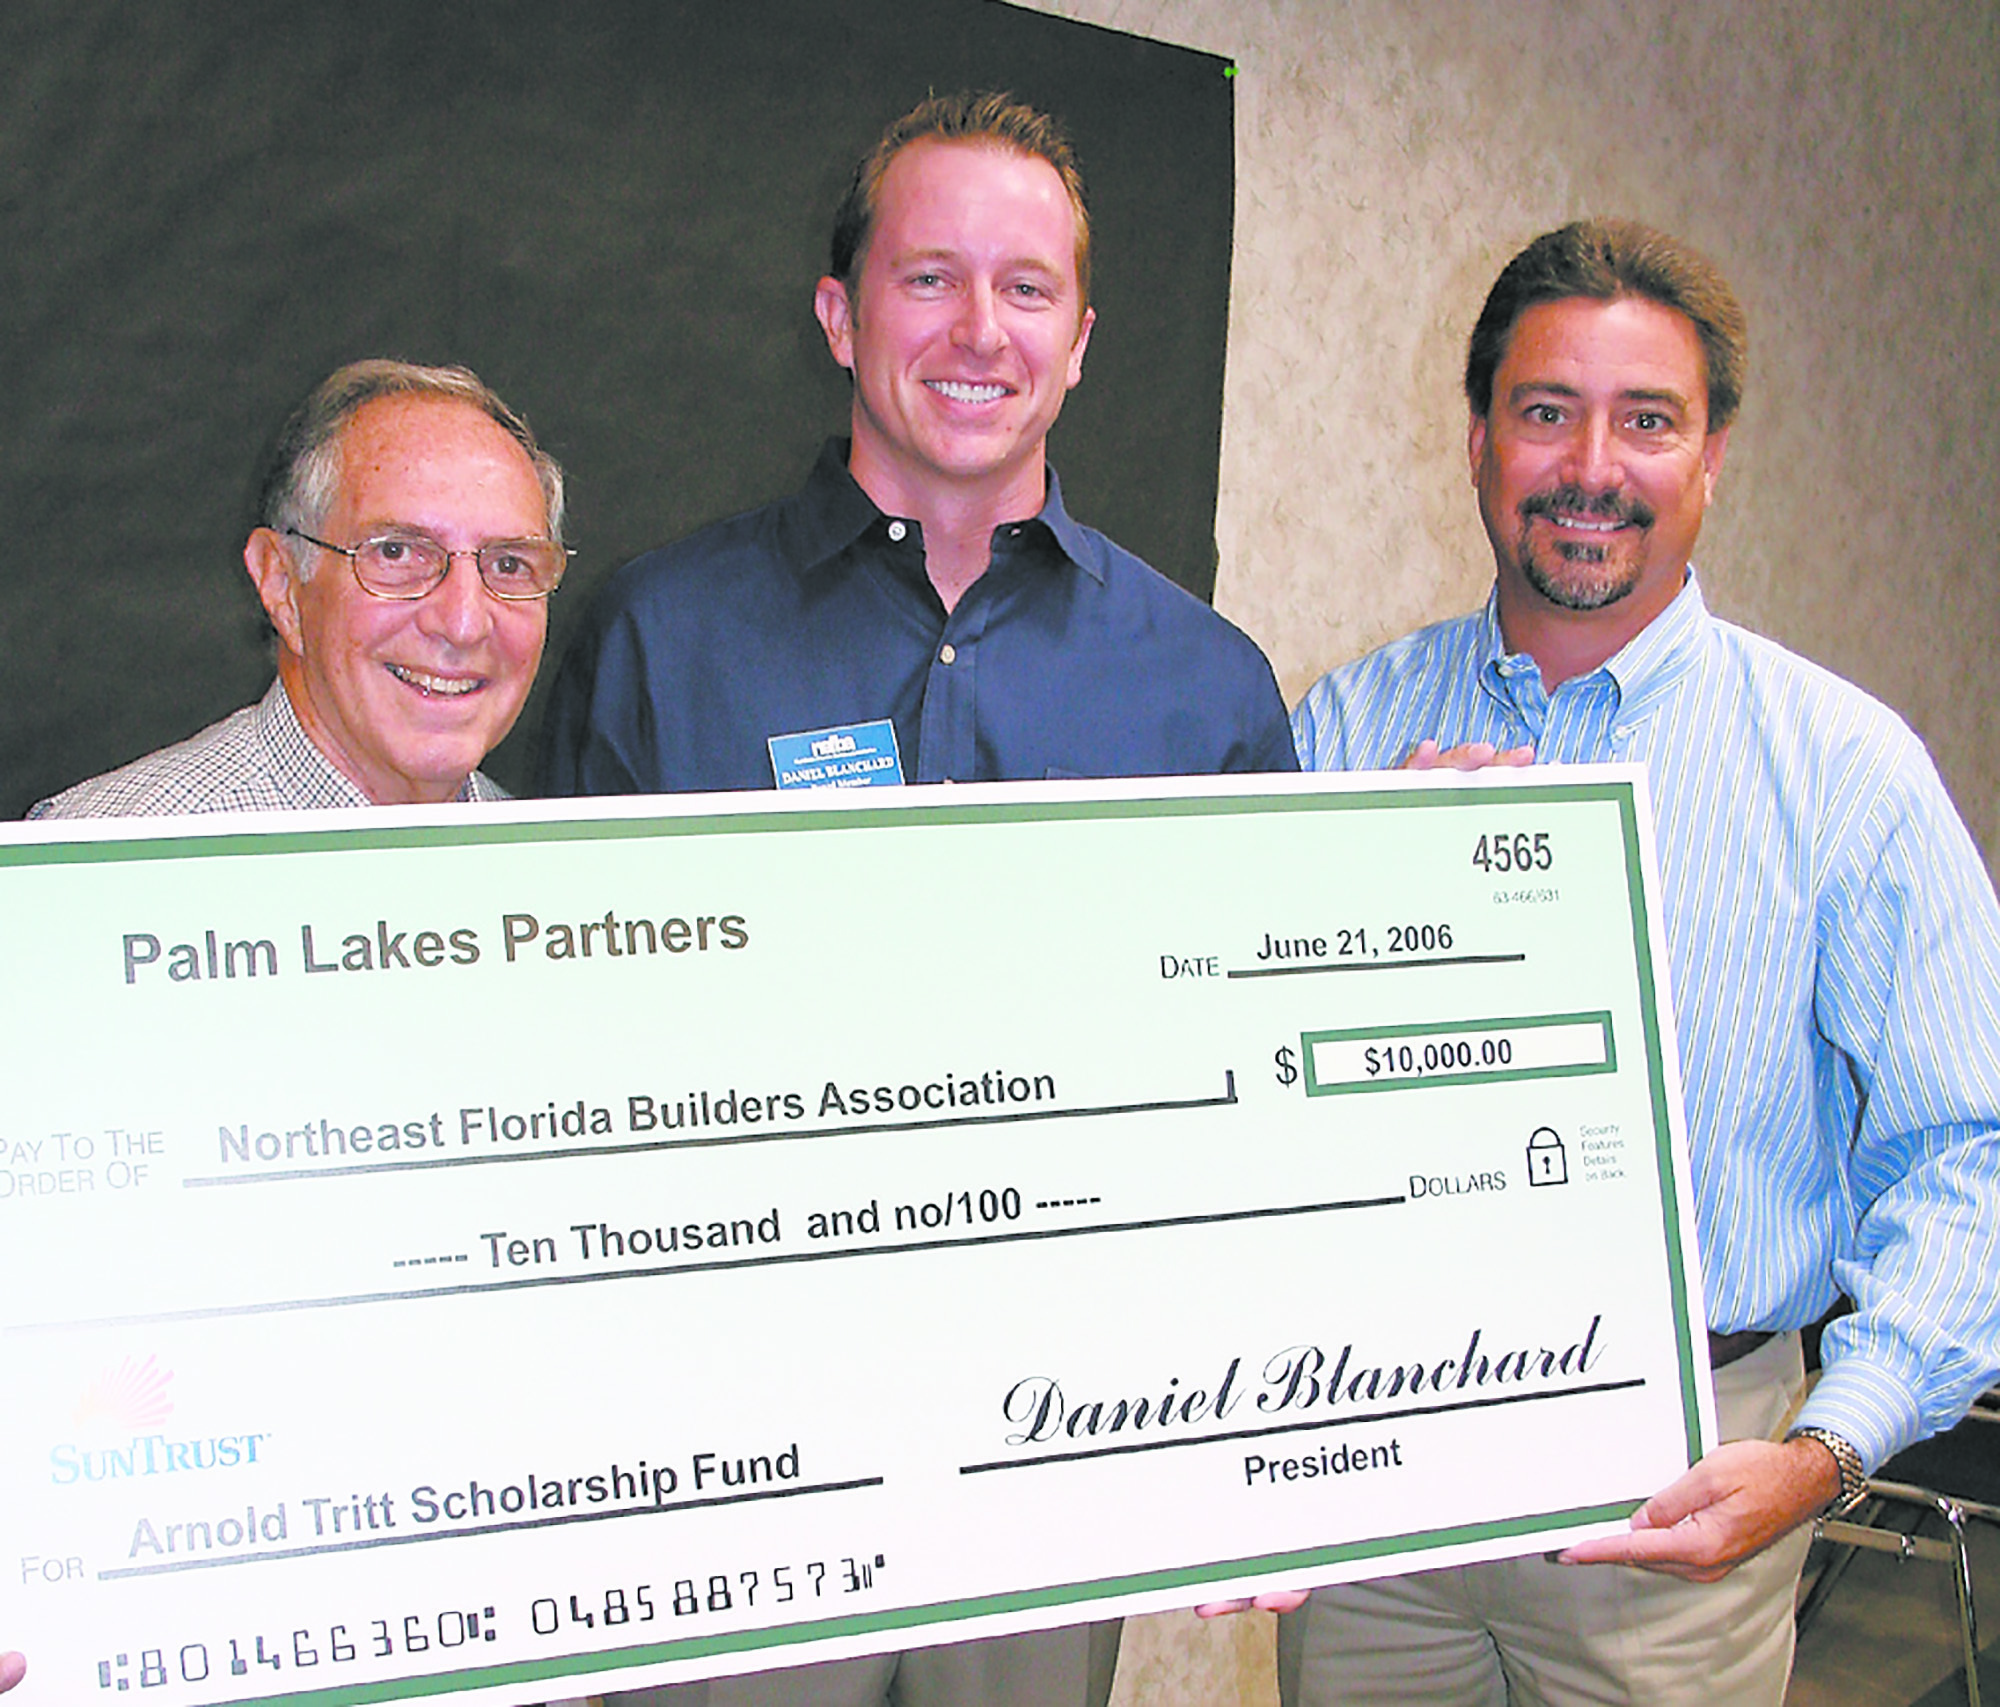 Arnold Tritt accepts a check for the Arnold Tritt Scholarship Fund from Daniel Blanchard and Glenn Layton.